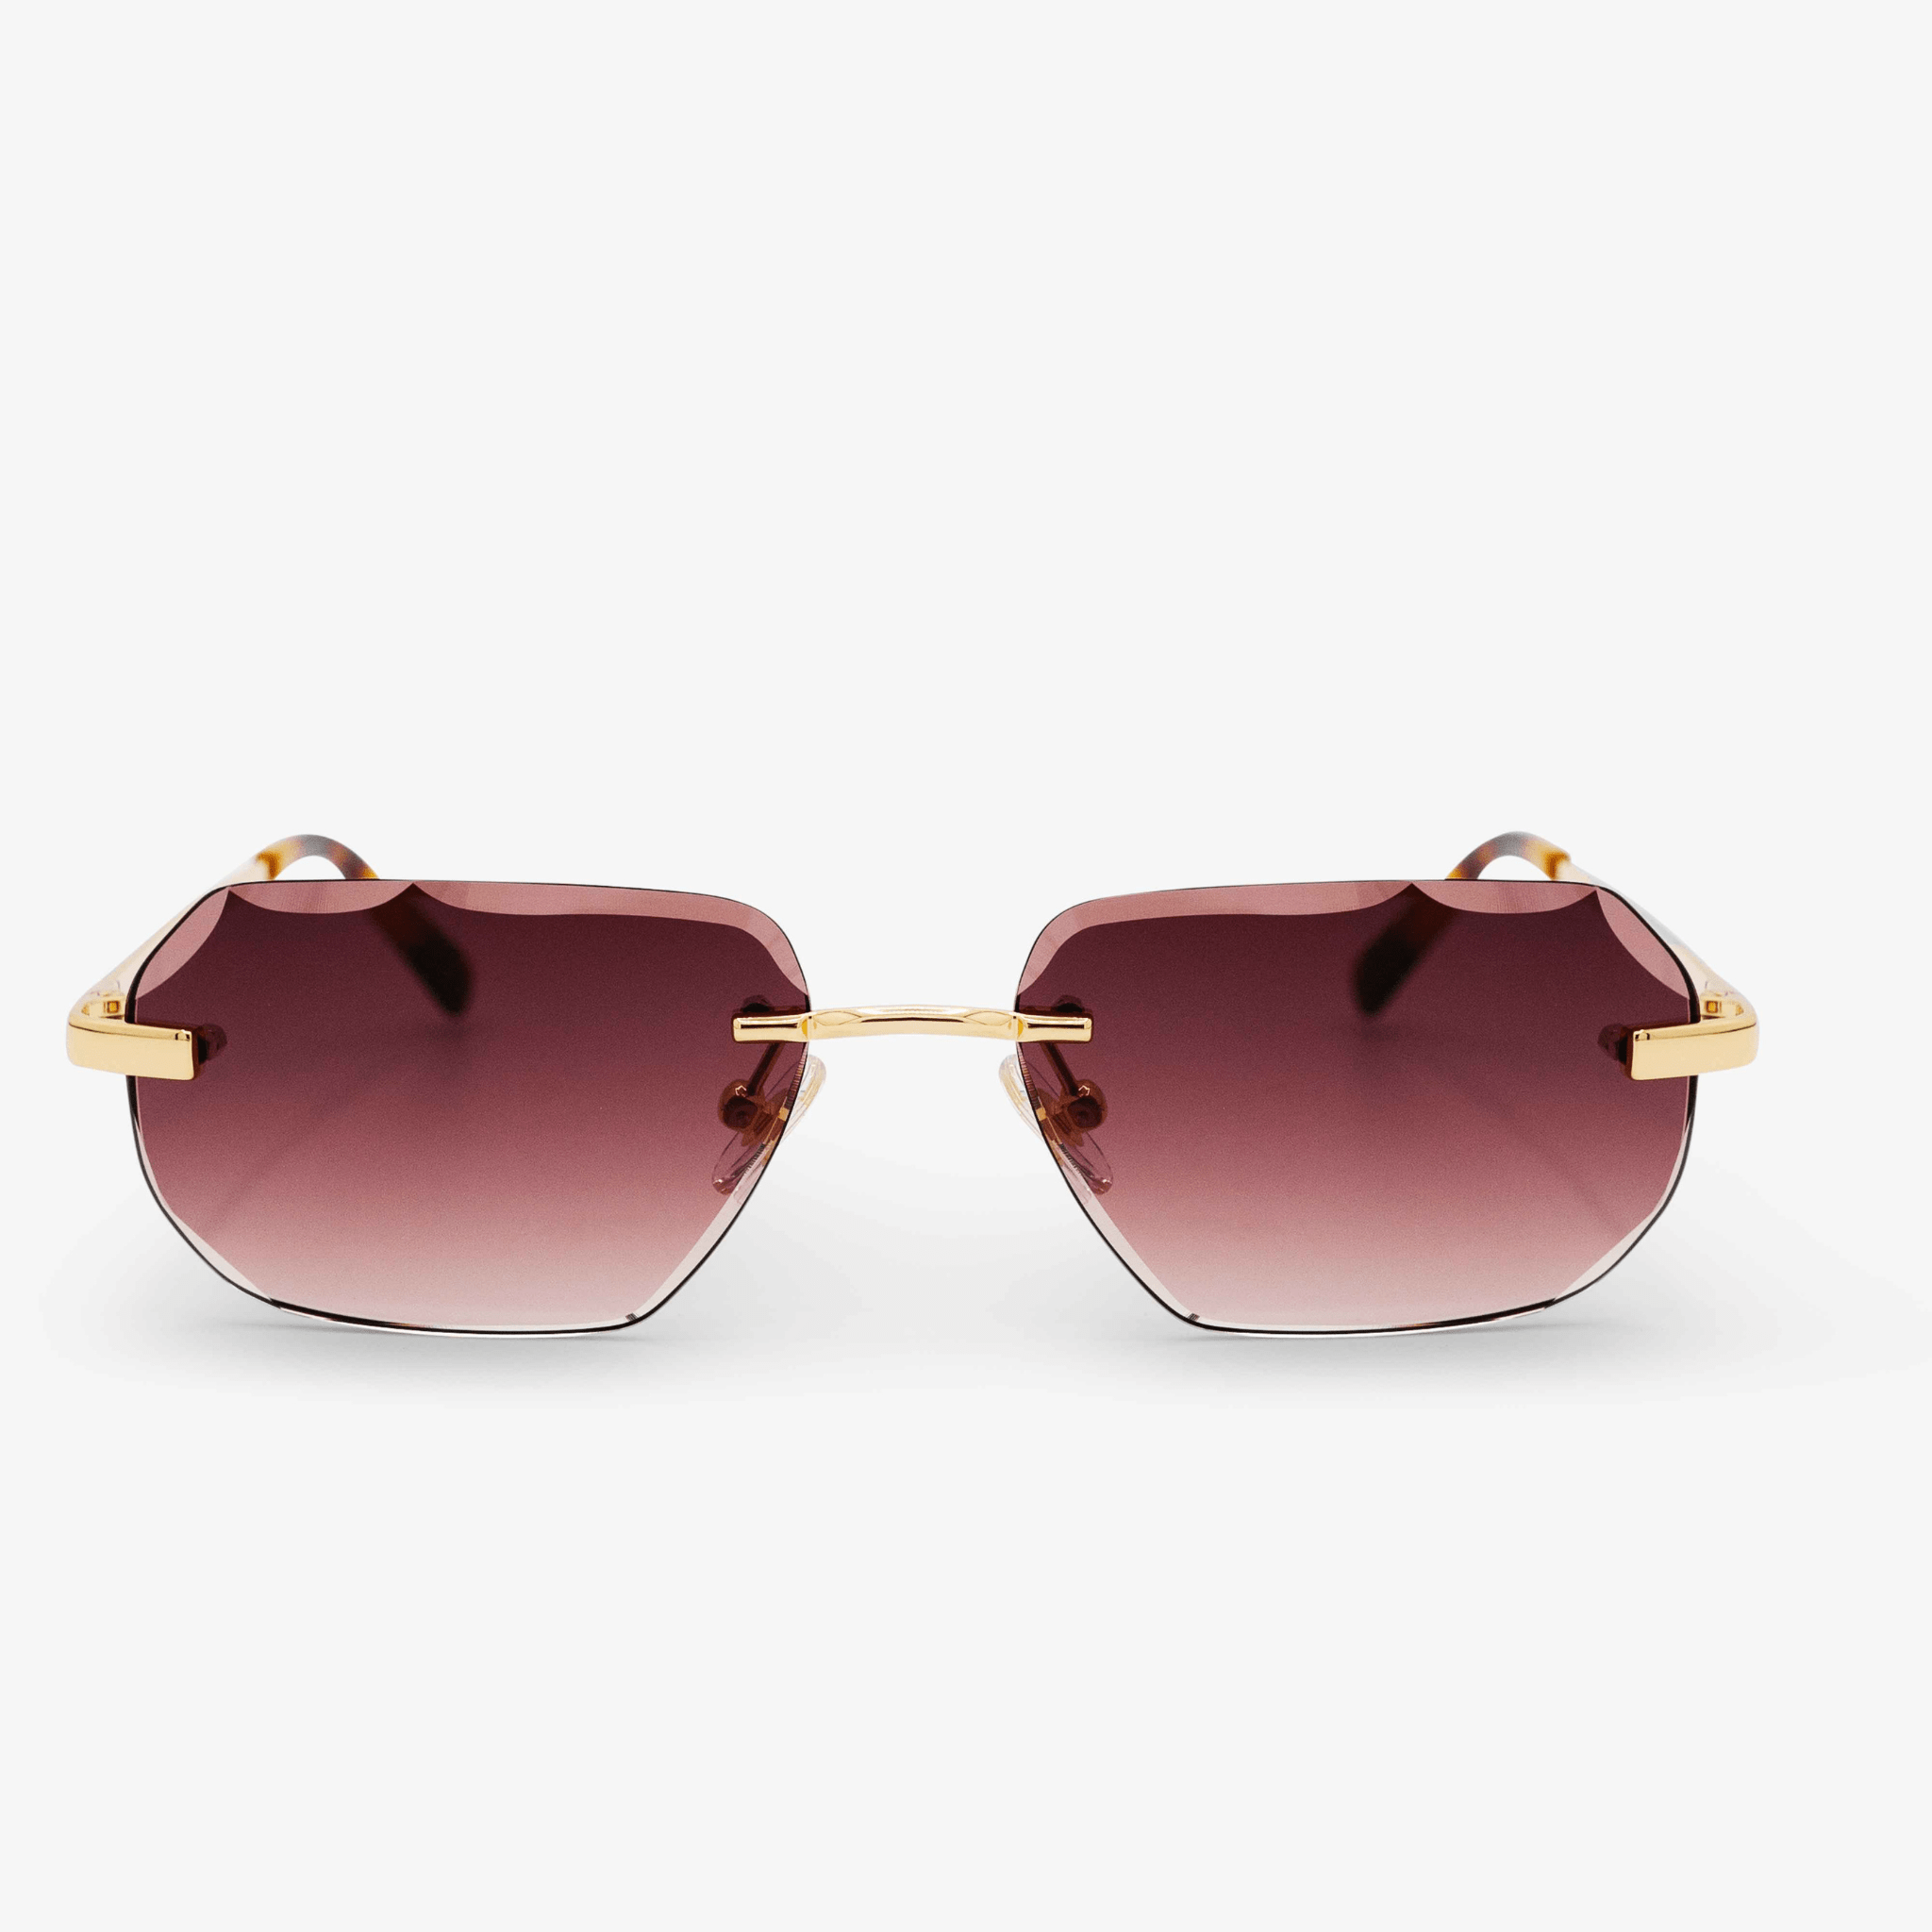 A pair of Jubilee model sunglasses with 18k gold-plated accents and rimless, diamond-cut design. The lenses have a gradient tint, transitioning from a darker shade at the top to a lighter one at the bottom.